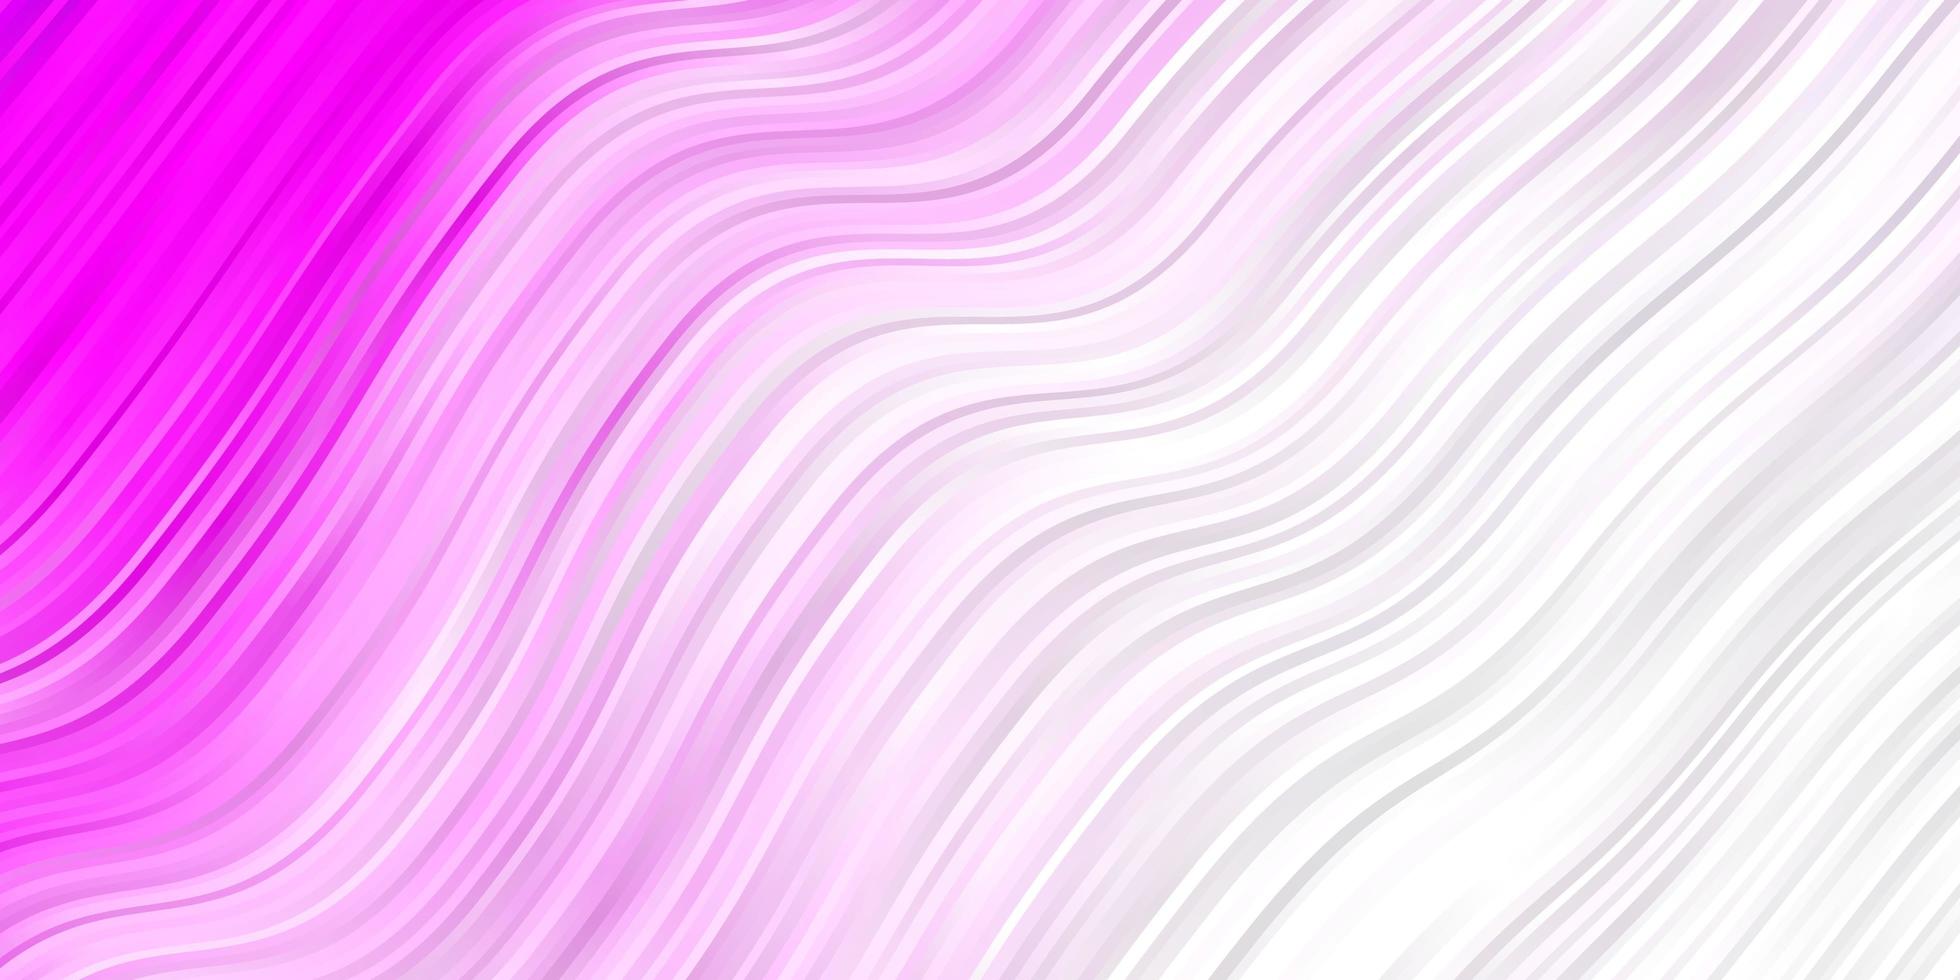 Light Purple vector background with curved lines.